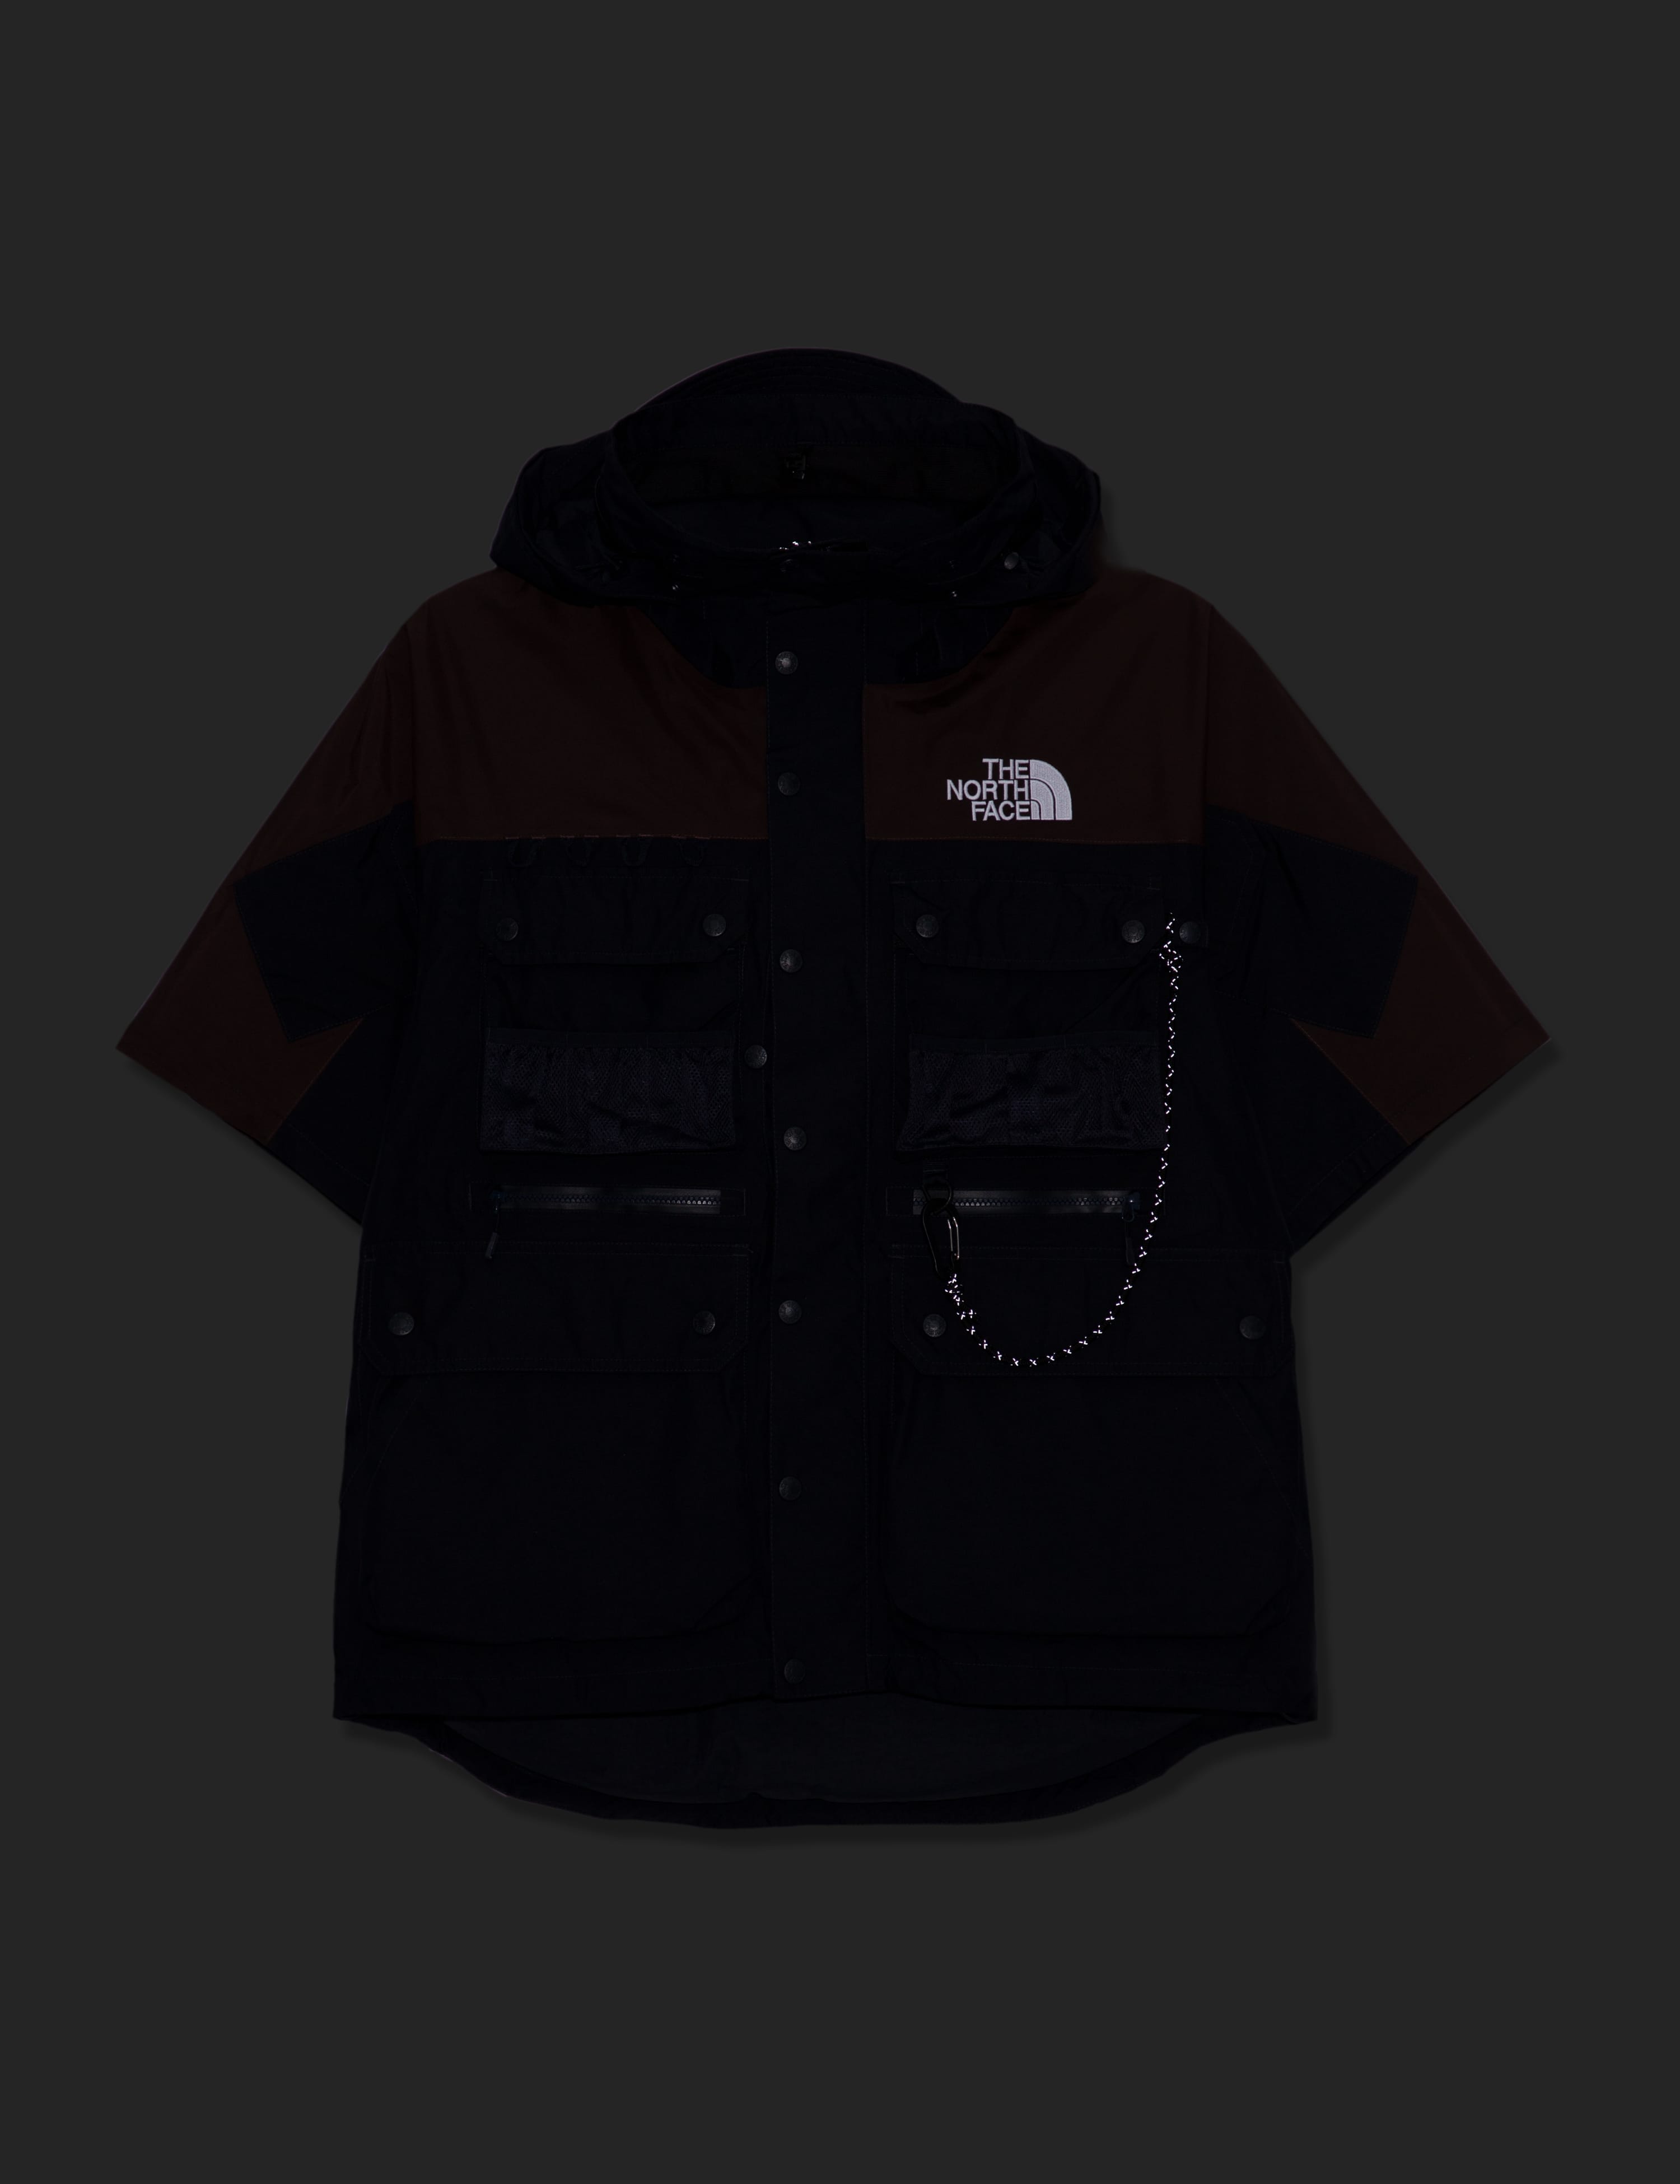 The North Face - GORE-TEX Outdoor Jacket | HBX - Globally Curated